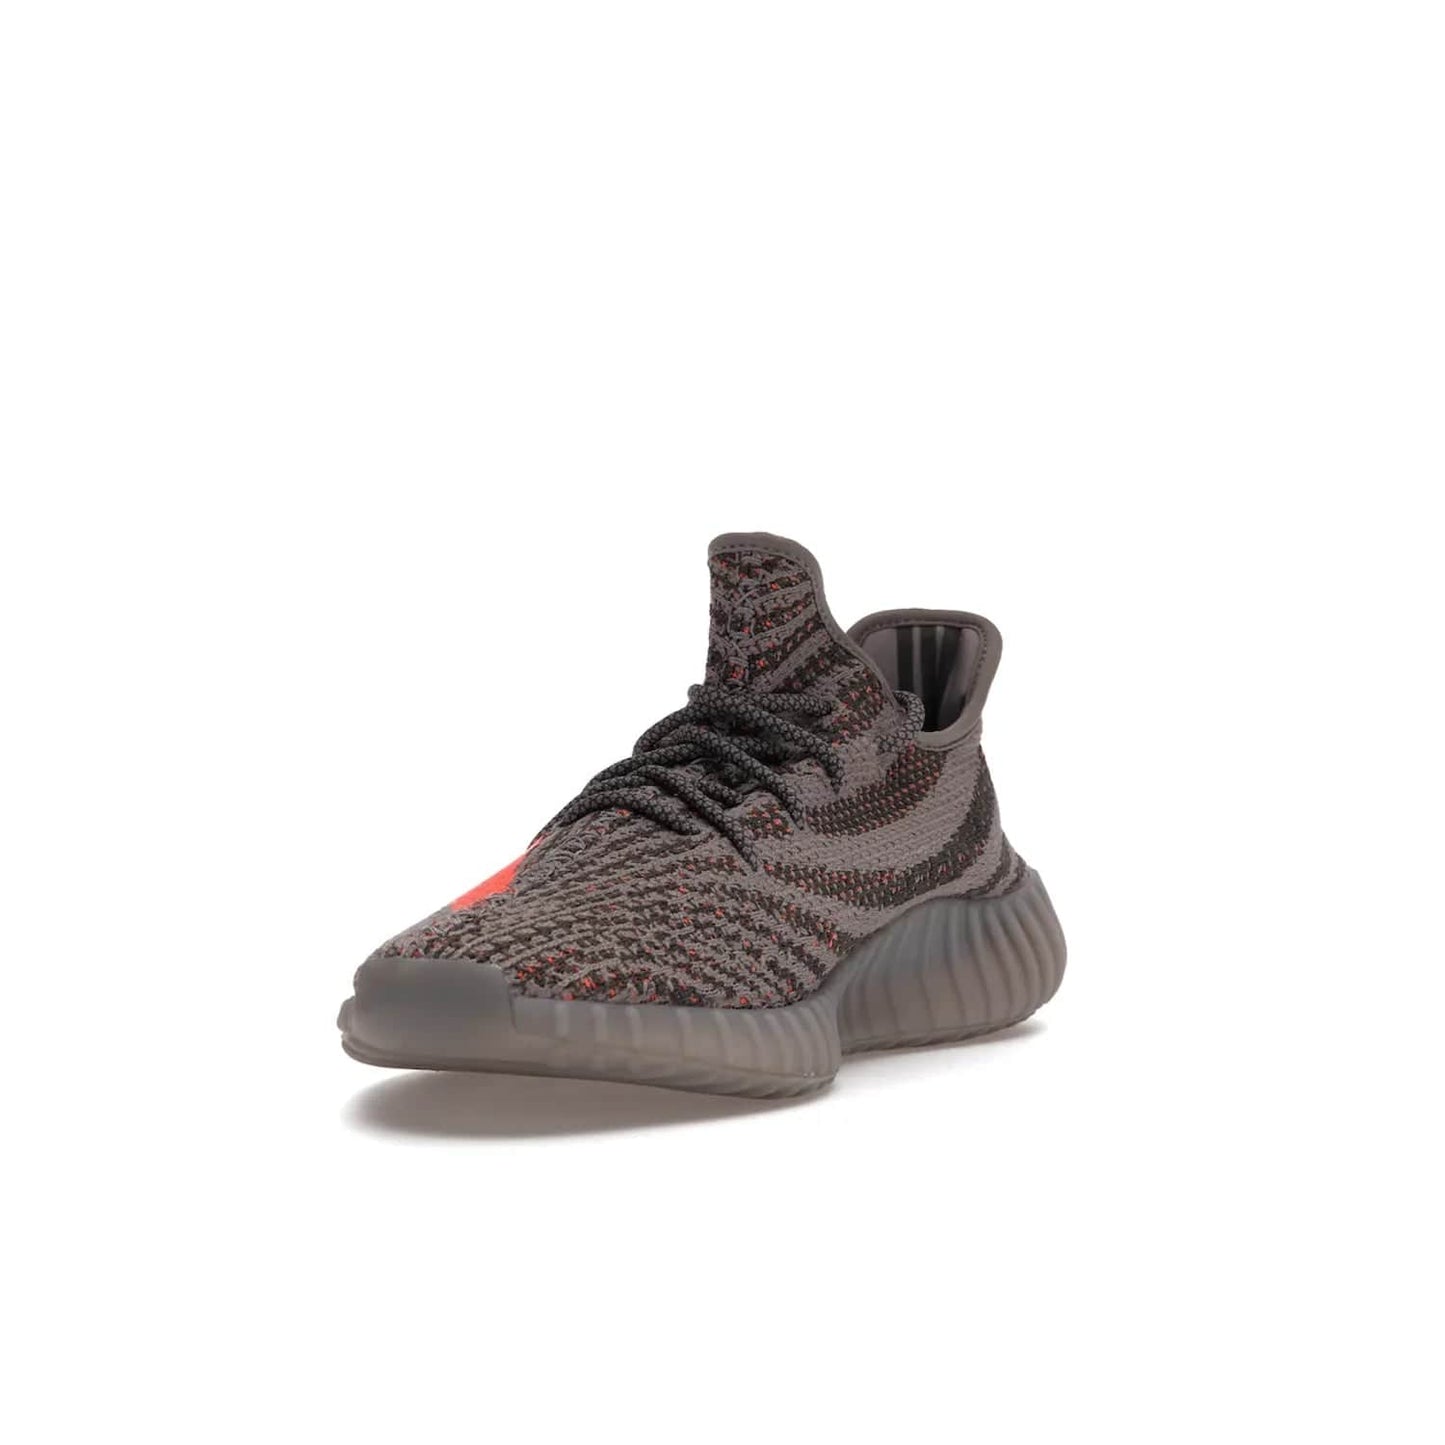 adidas Yeezy Boost 350 V2 Beluga Reflective - Image 13 - Only at www.BallersClubKickz.com - Shop the adidas Yeezy Boost 350 V2 Beluga Reflective: a stylish, reflective sneaker that stands out. Featuring Boost sole, Primeknit upper & signature orange stripe. Available Dec 2021.